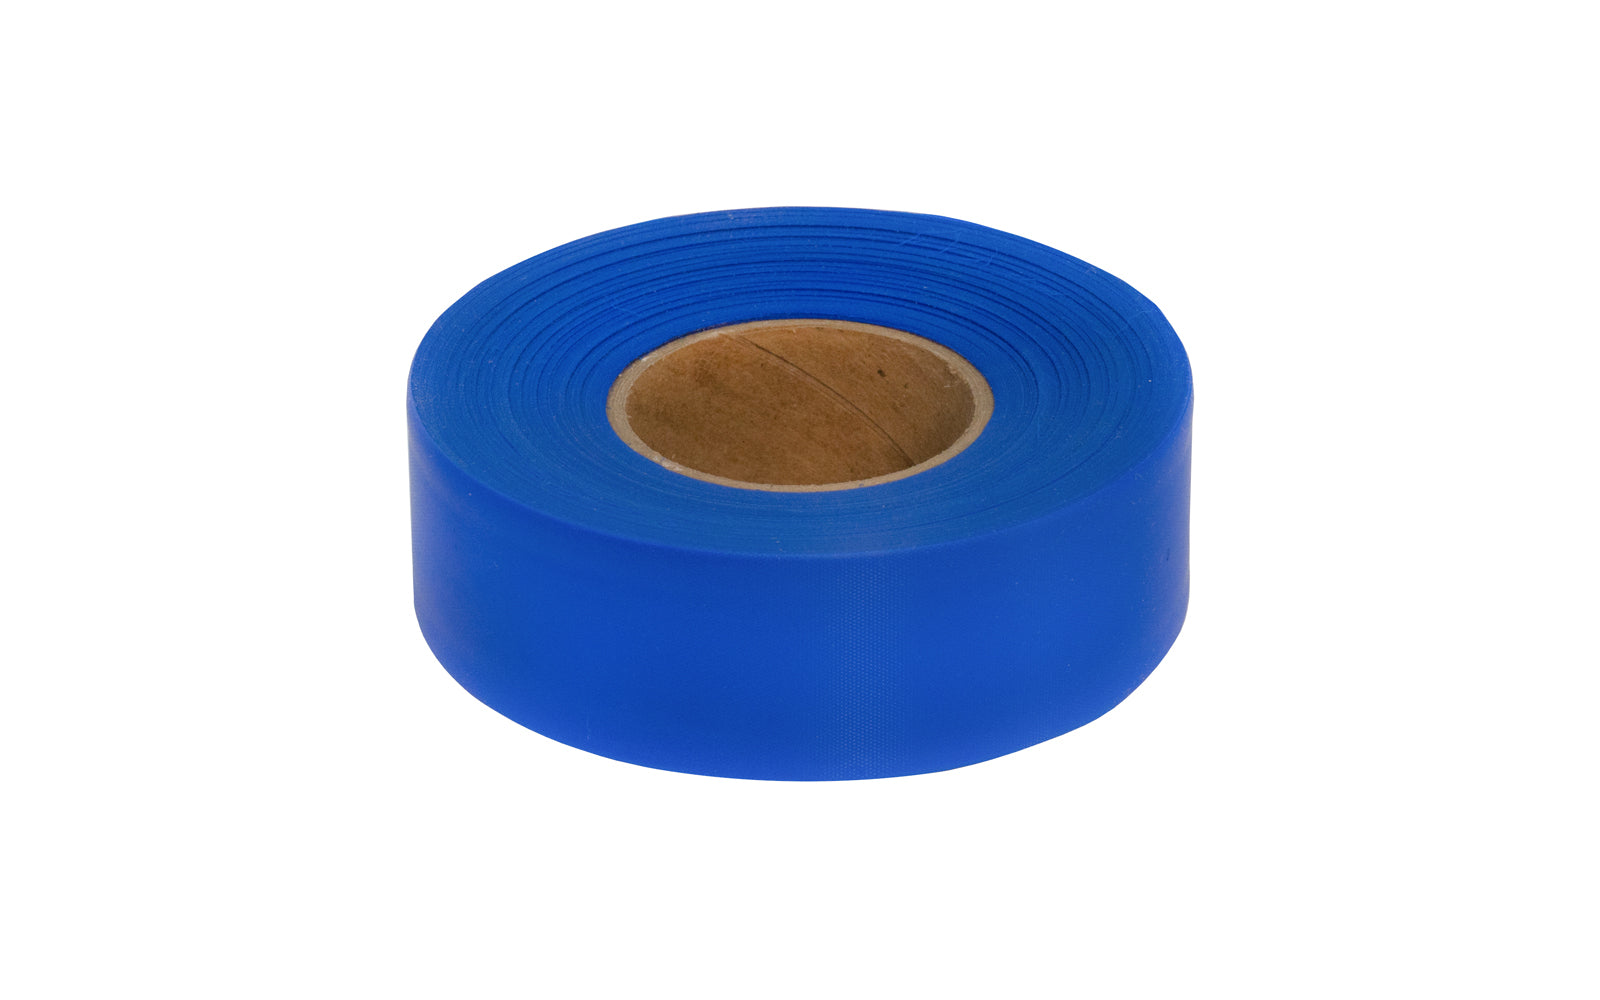 This Swanson Blue Flagging Tape 1.1875" x 300' is durable plastic tape that remains pliant in cold weather. Easy to tear & tie off. Tape is ideal for marking trails, surveying projects, & similar tasks. Model No. RFTBL300. Blue Color. 038987633010